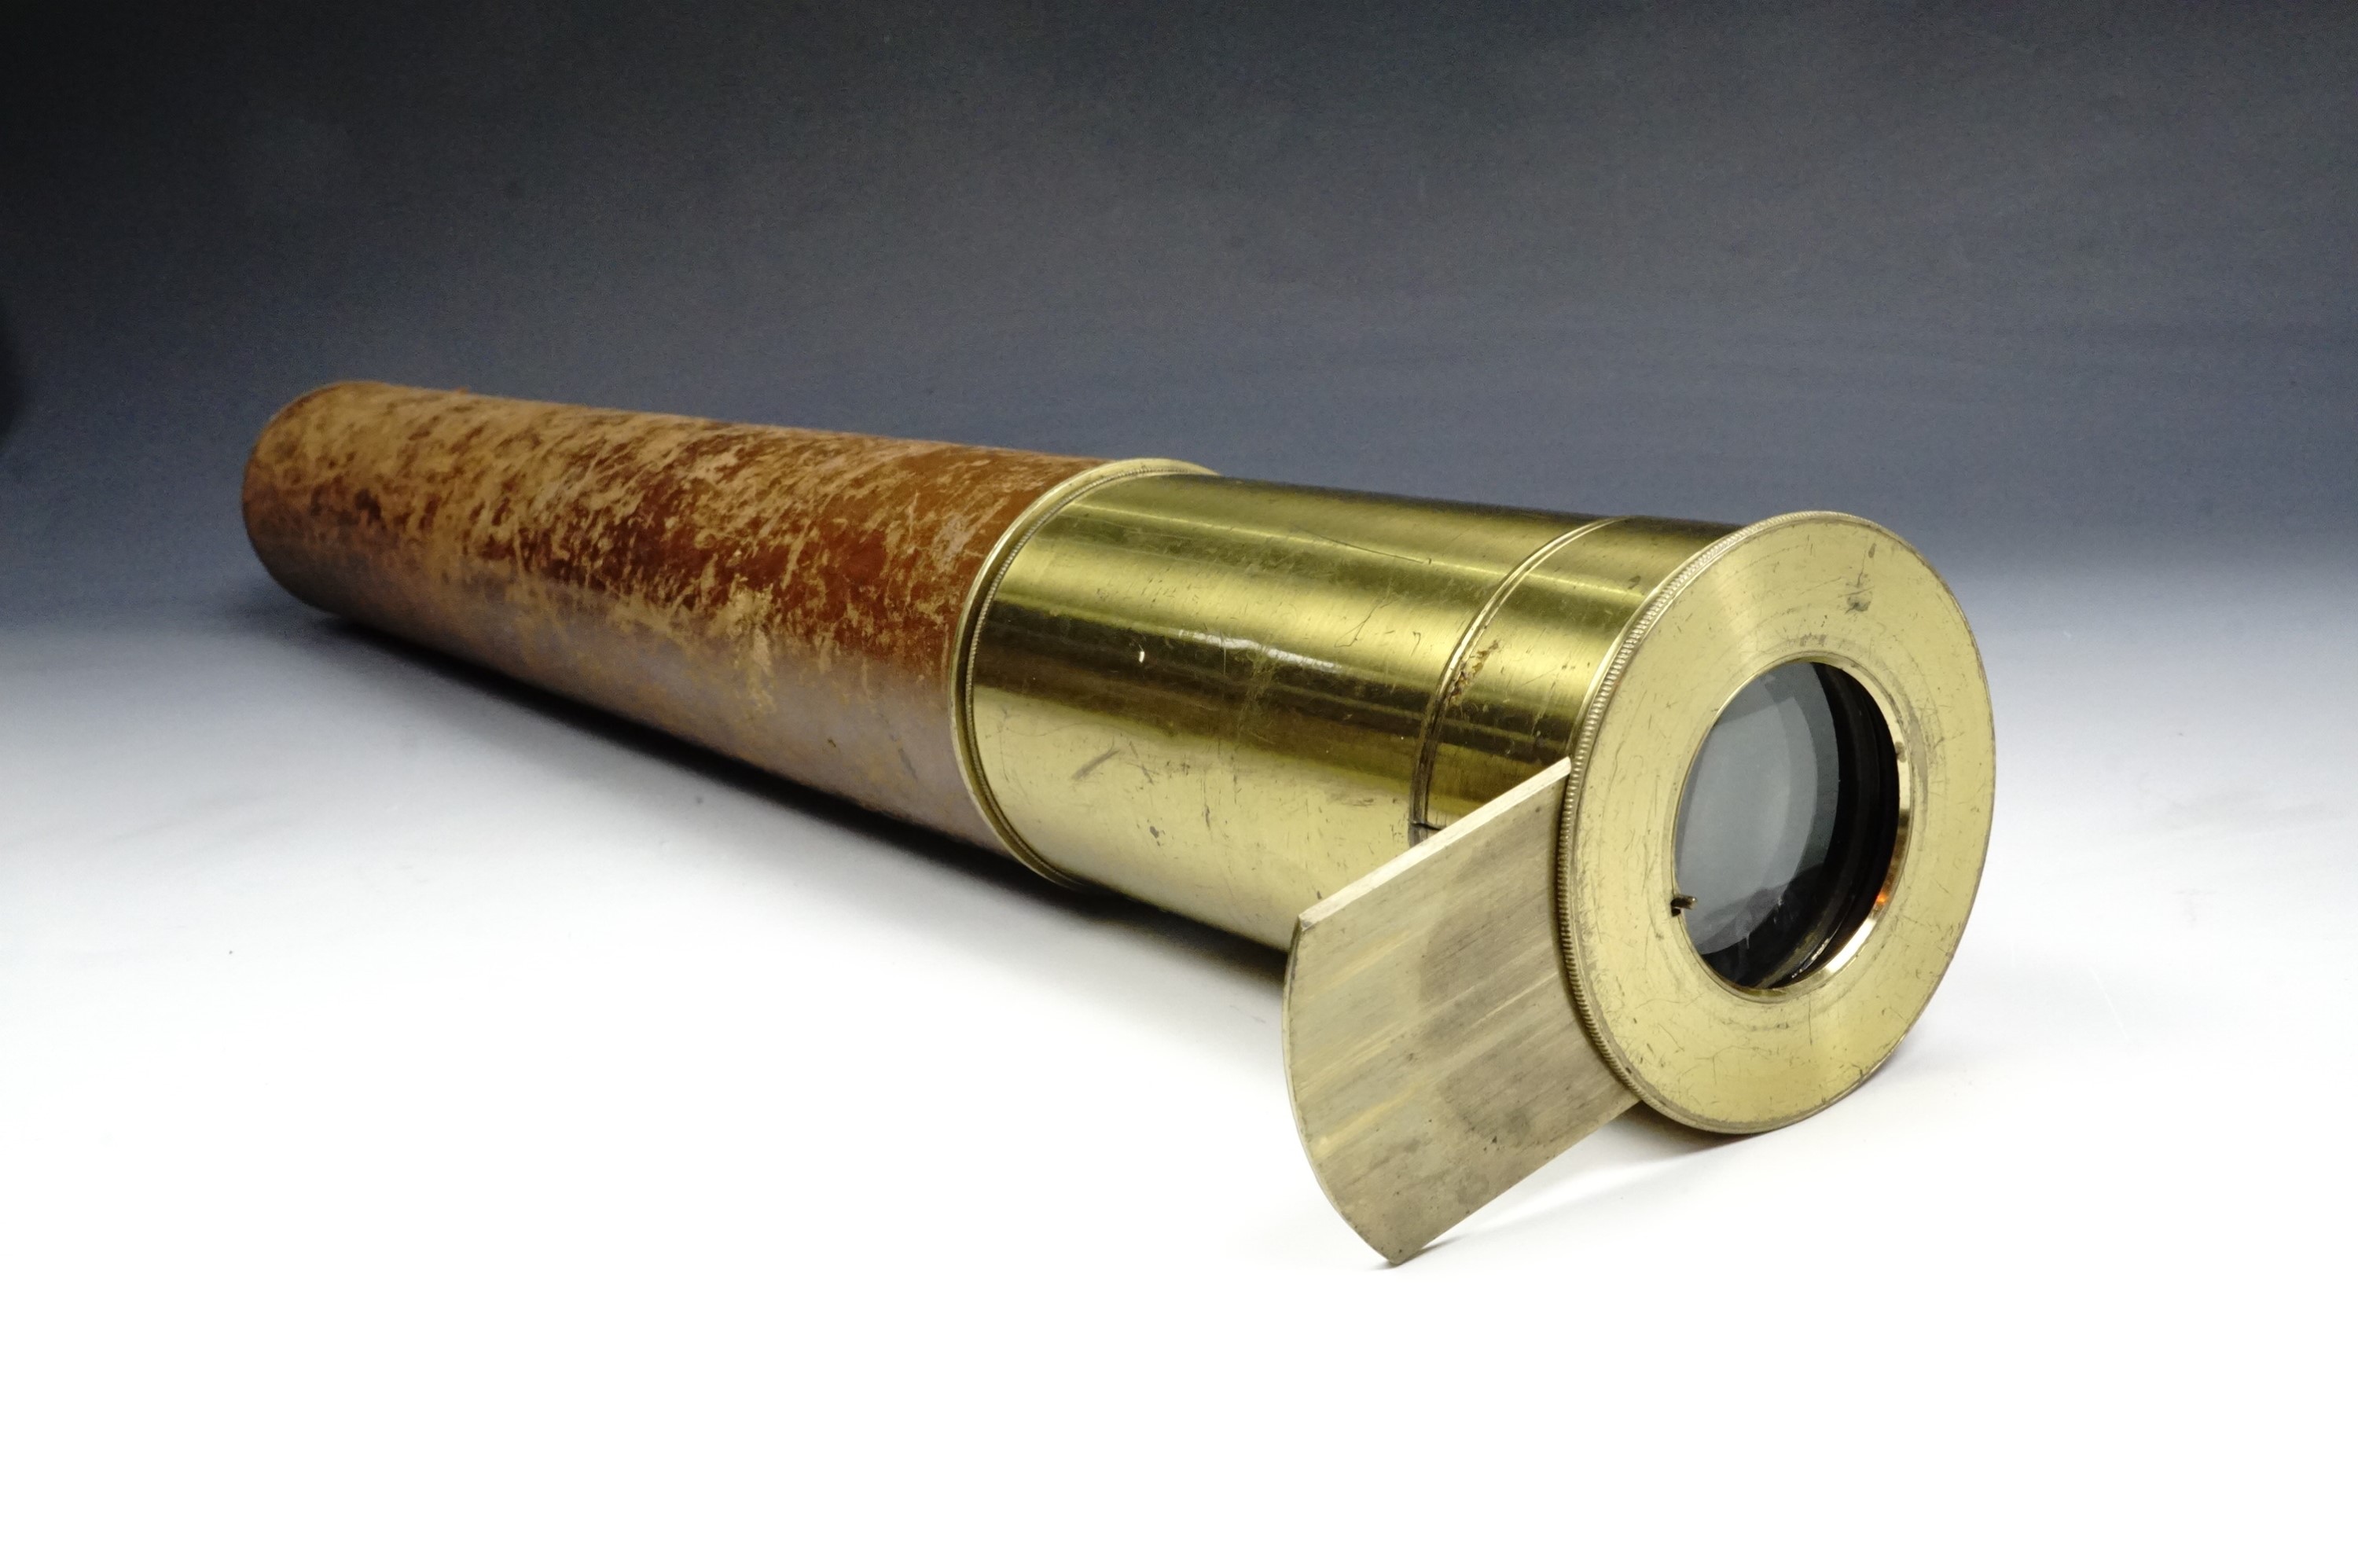 A Victorian Anchor trade mark "Try Me" single draw brass telescope, having a 1 1/2 inch objective, - Image 4 of 4